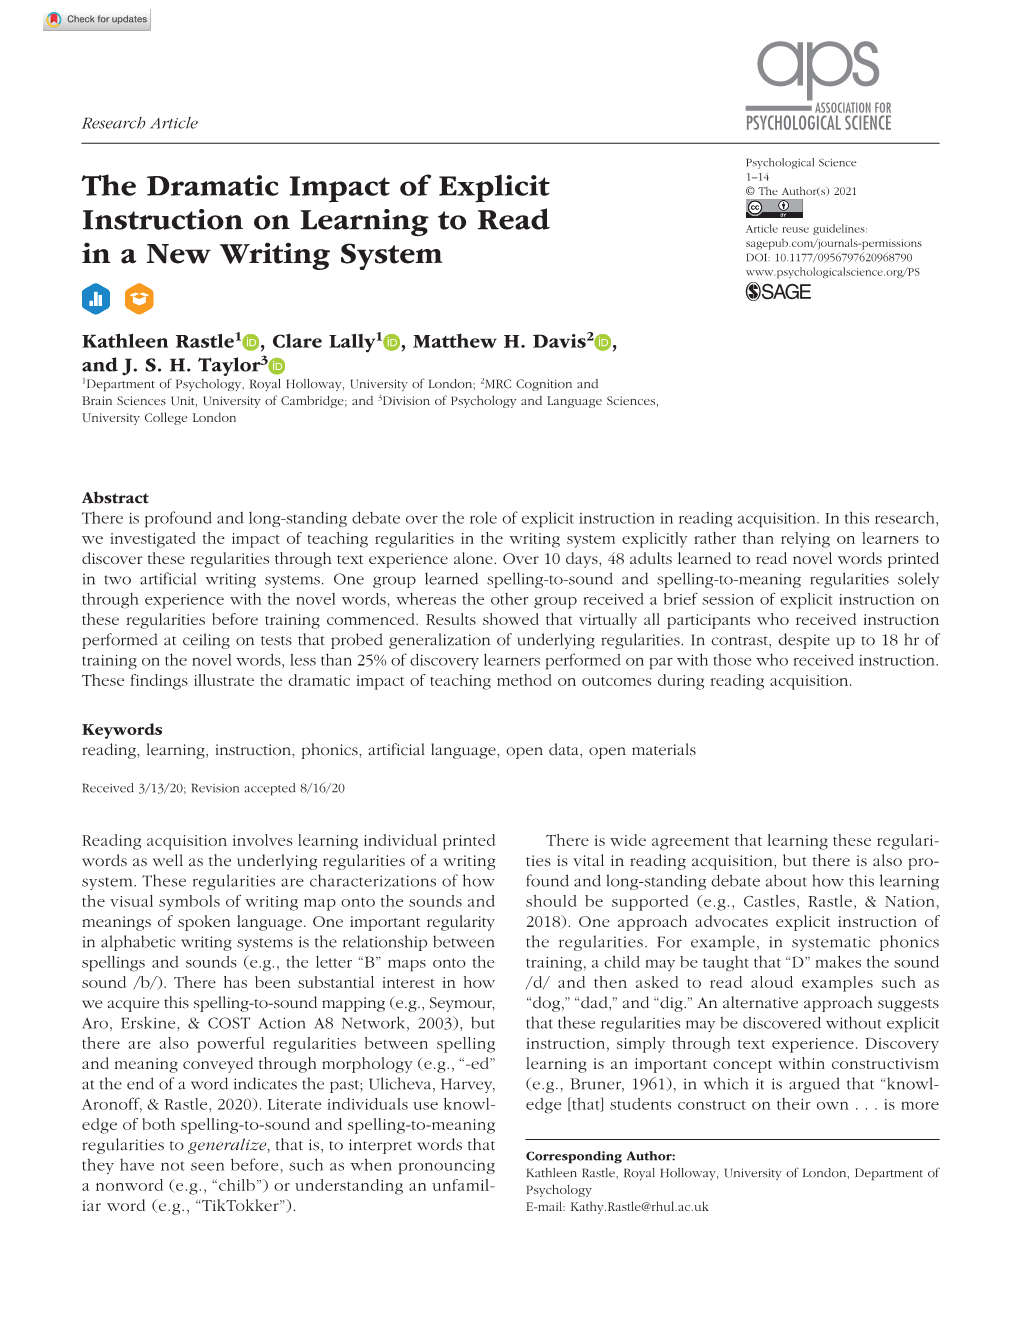 The Dramatic Impact of Explicit Instruction on Learning to Read in A